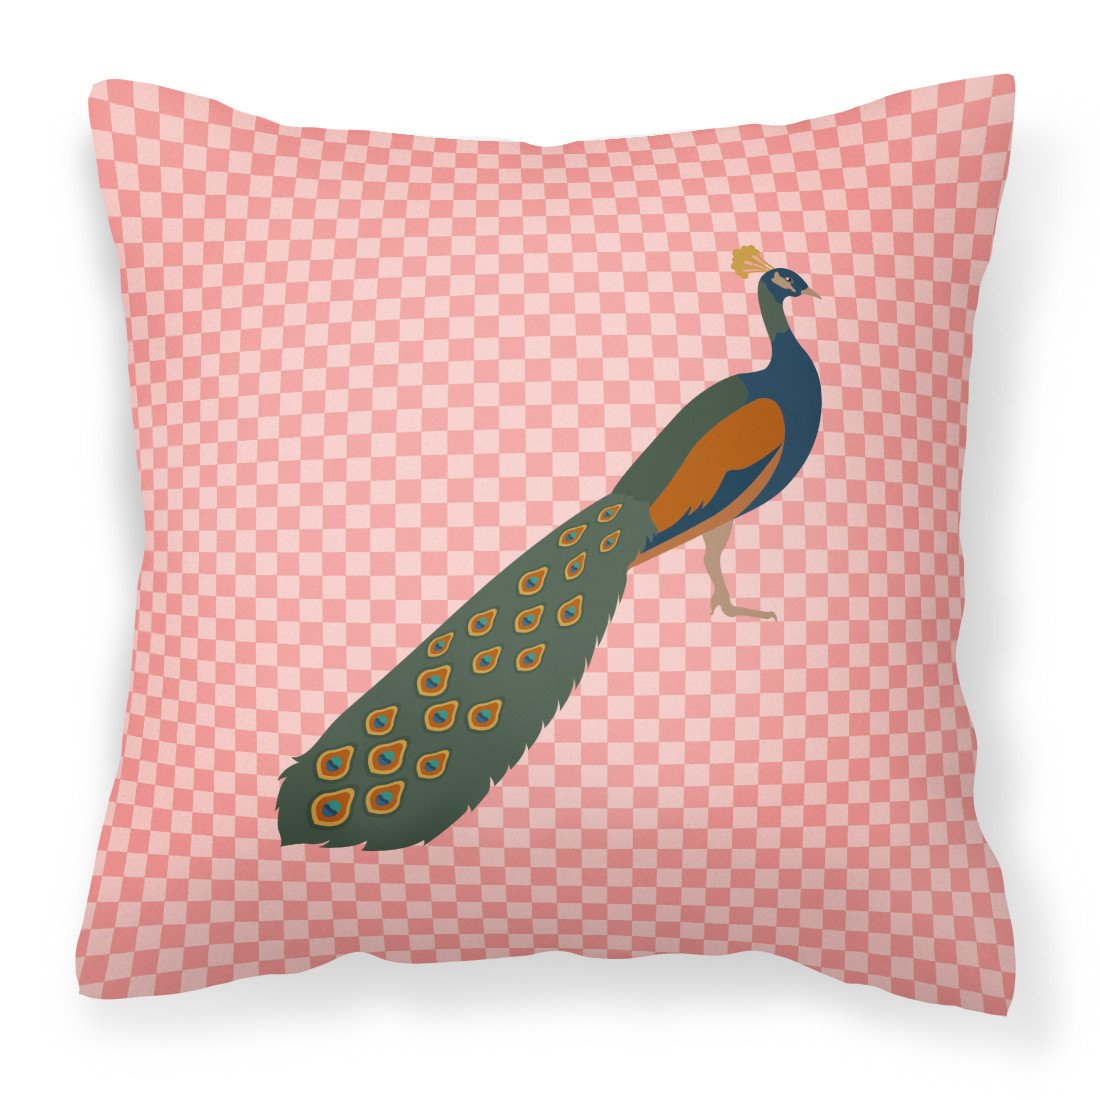 Indian Peacock Peafowl Pink Check Fabric Decorative Pillow BB7925PW1818 by Caroline's Treasures